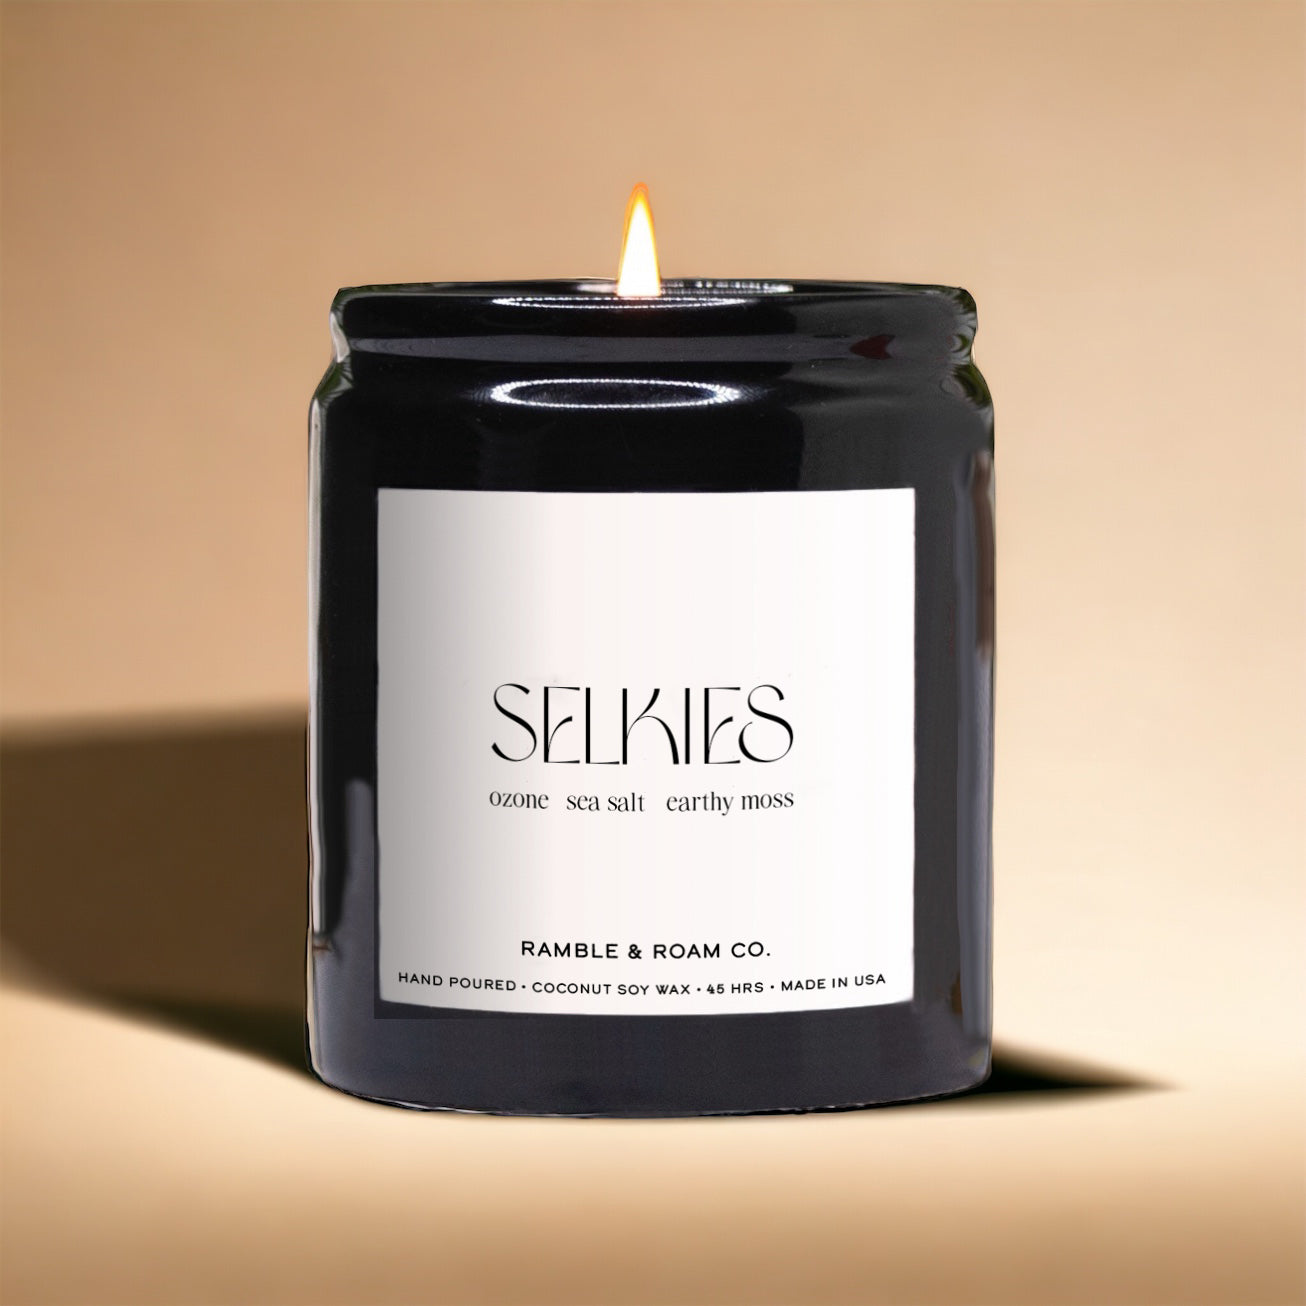 Selkies Candle Hand-Poured Coconut Soy Wax